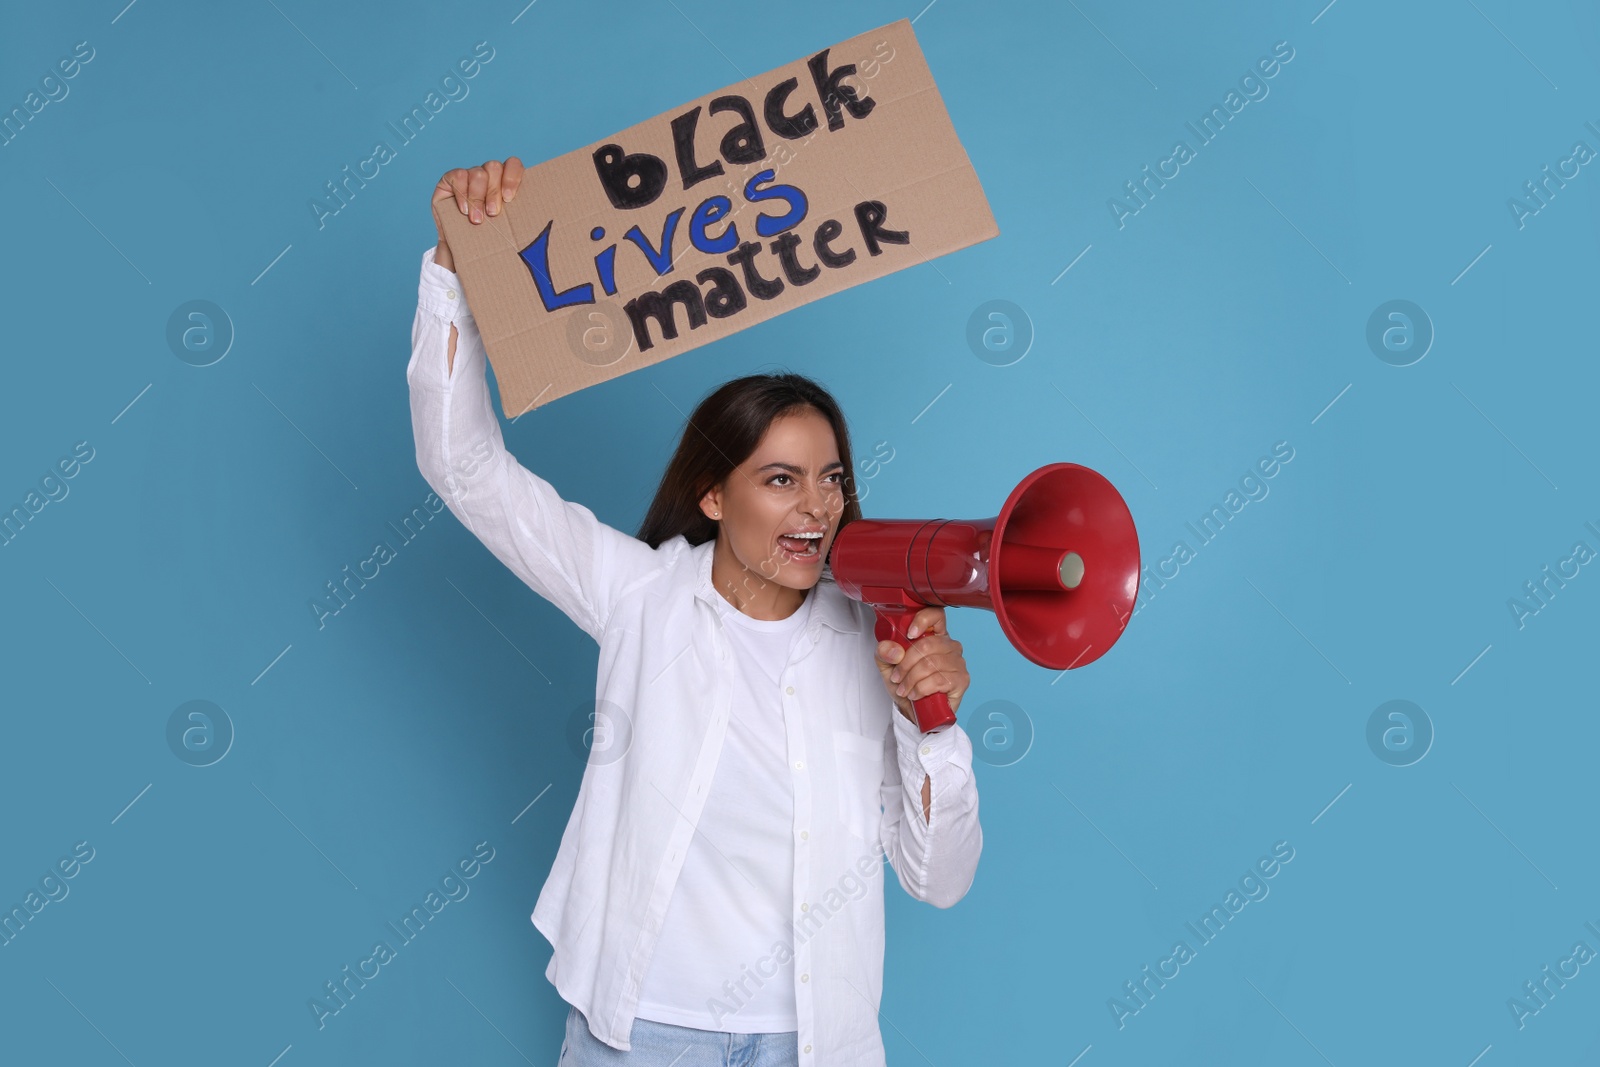 Photo of Emotional woman shouting into megaphone while holding sign with phrase Black Lives Matter on light blue background. End Racism